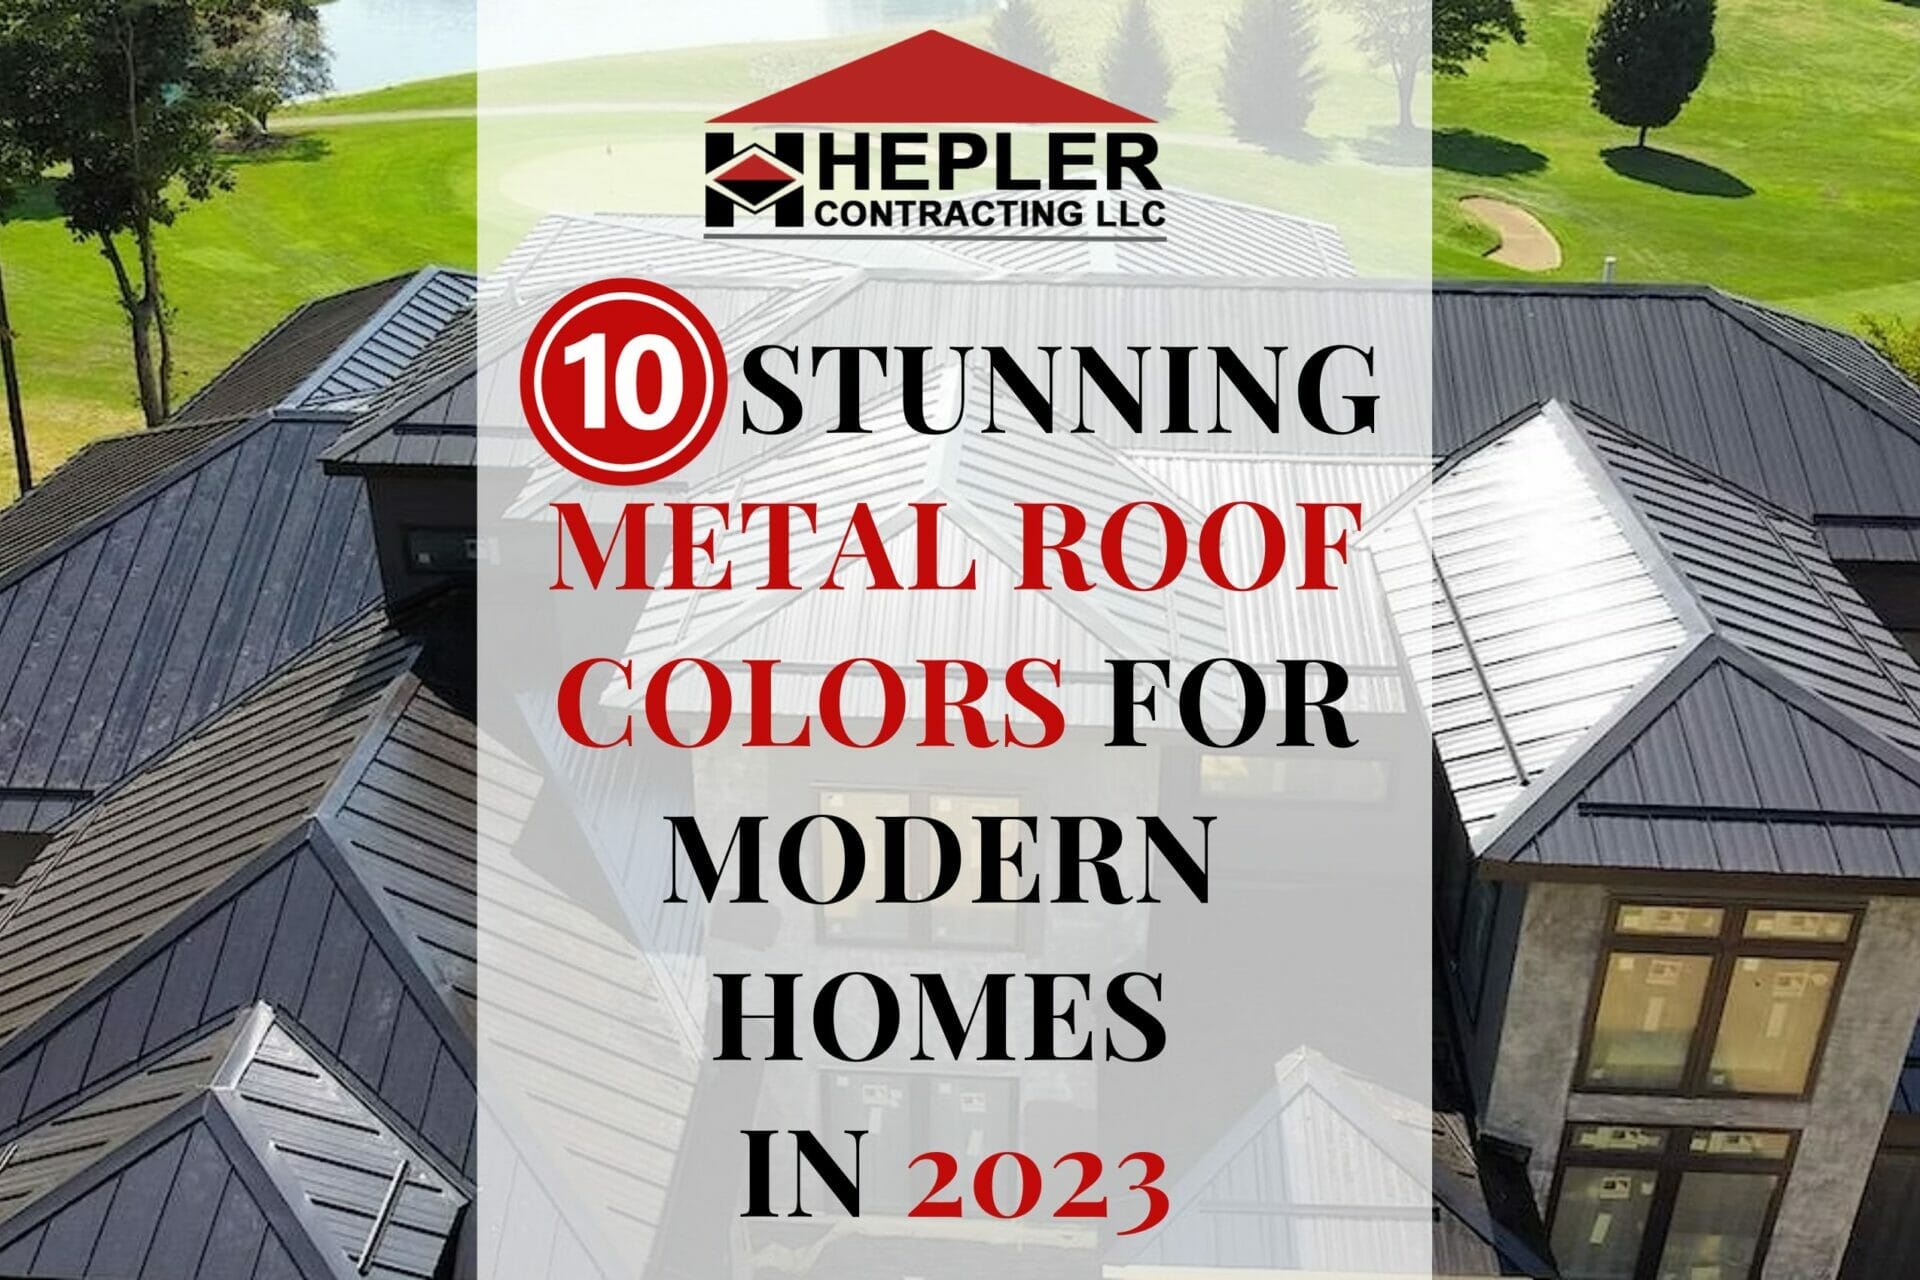 10 Stunning Mеtal Roof Colors For Modеrn Homеs in 2023